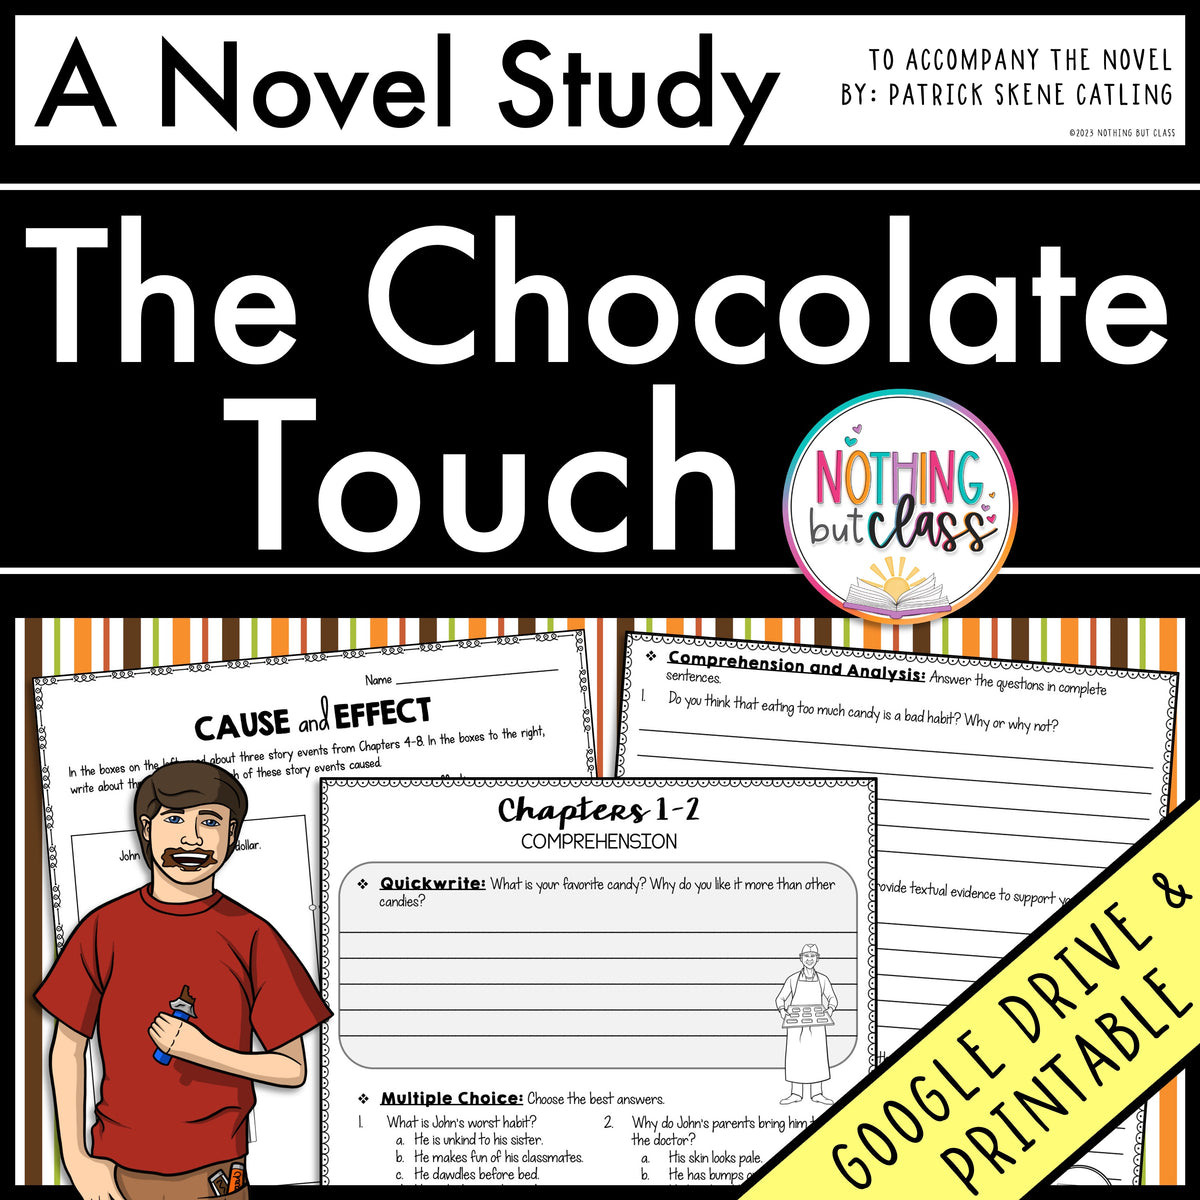 Novel Units: The Chocolate Touch